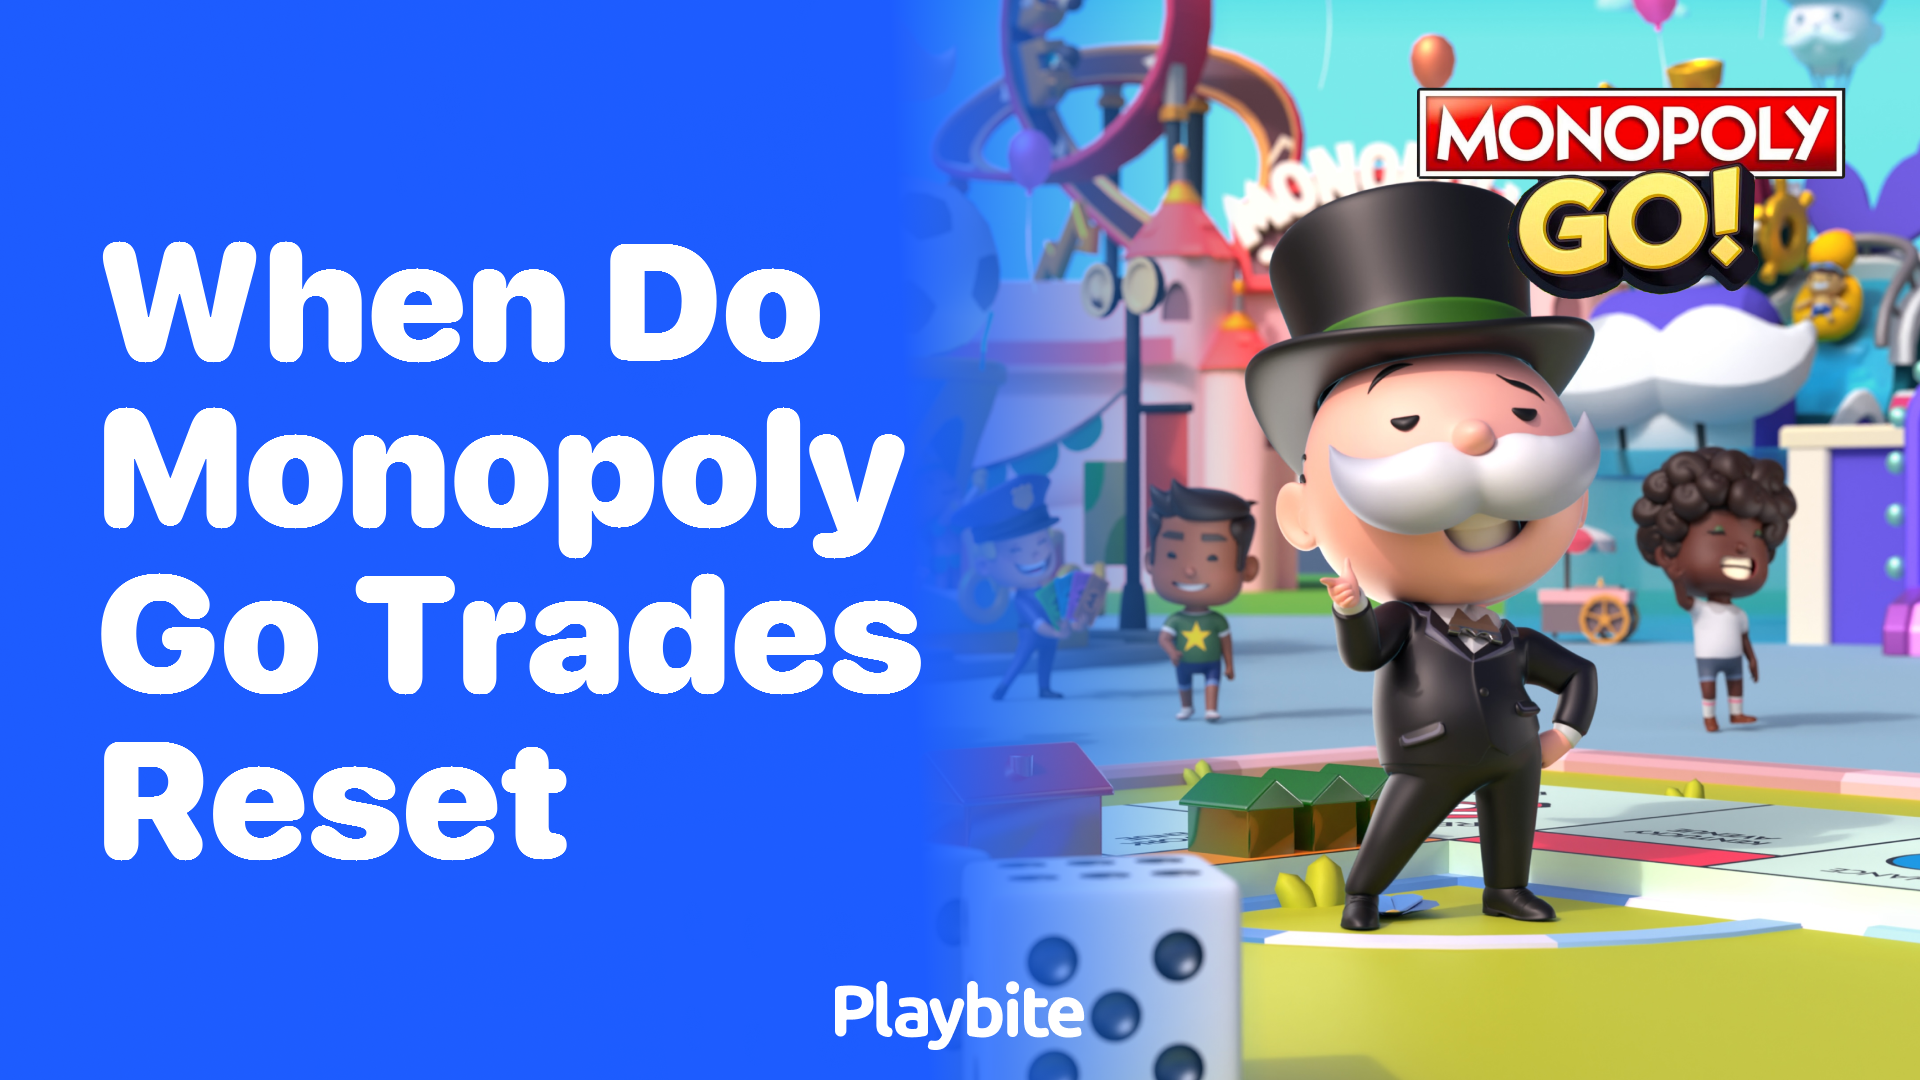 When Do Monopoly Go Trades Reset? Find Out Here!